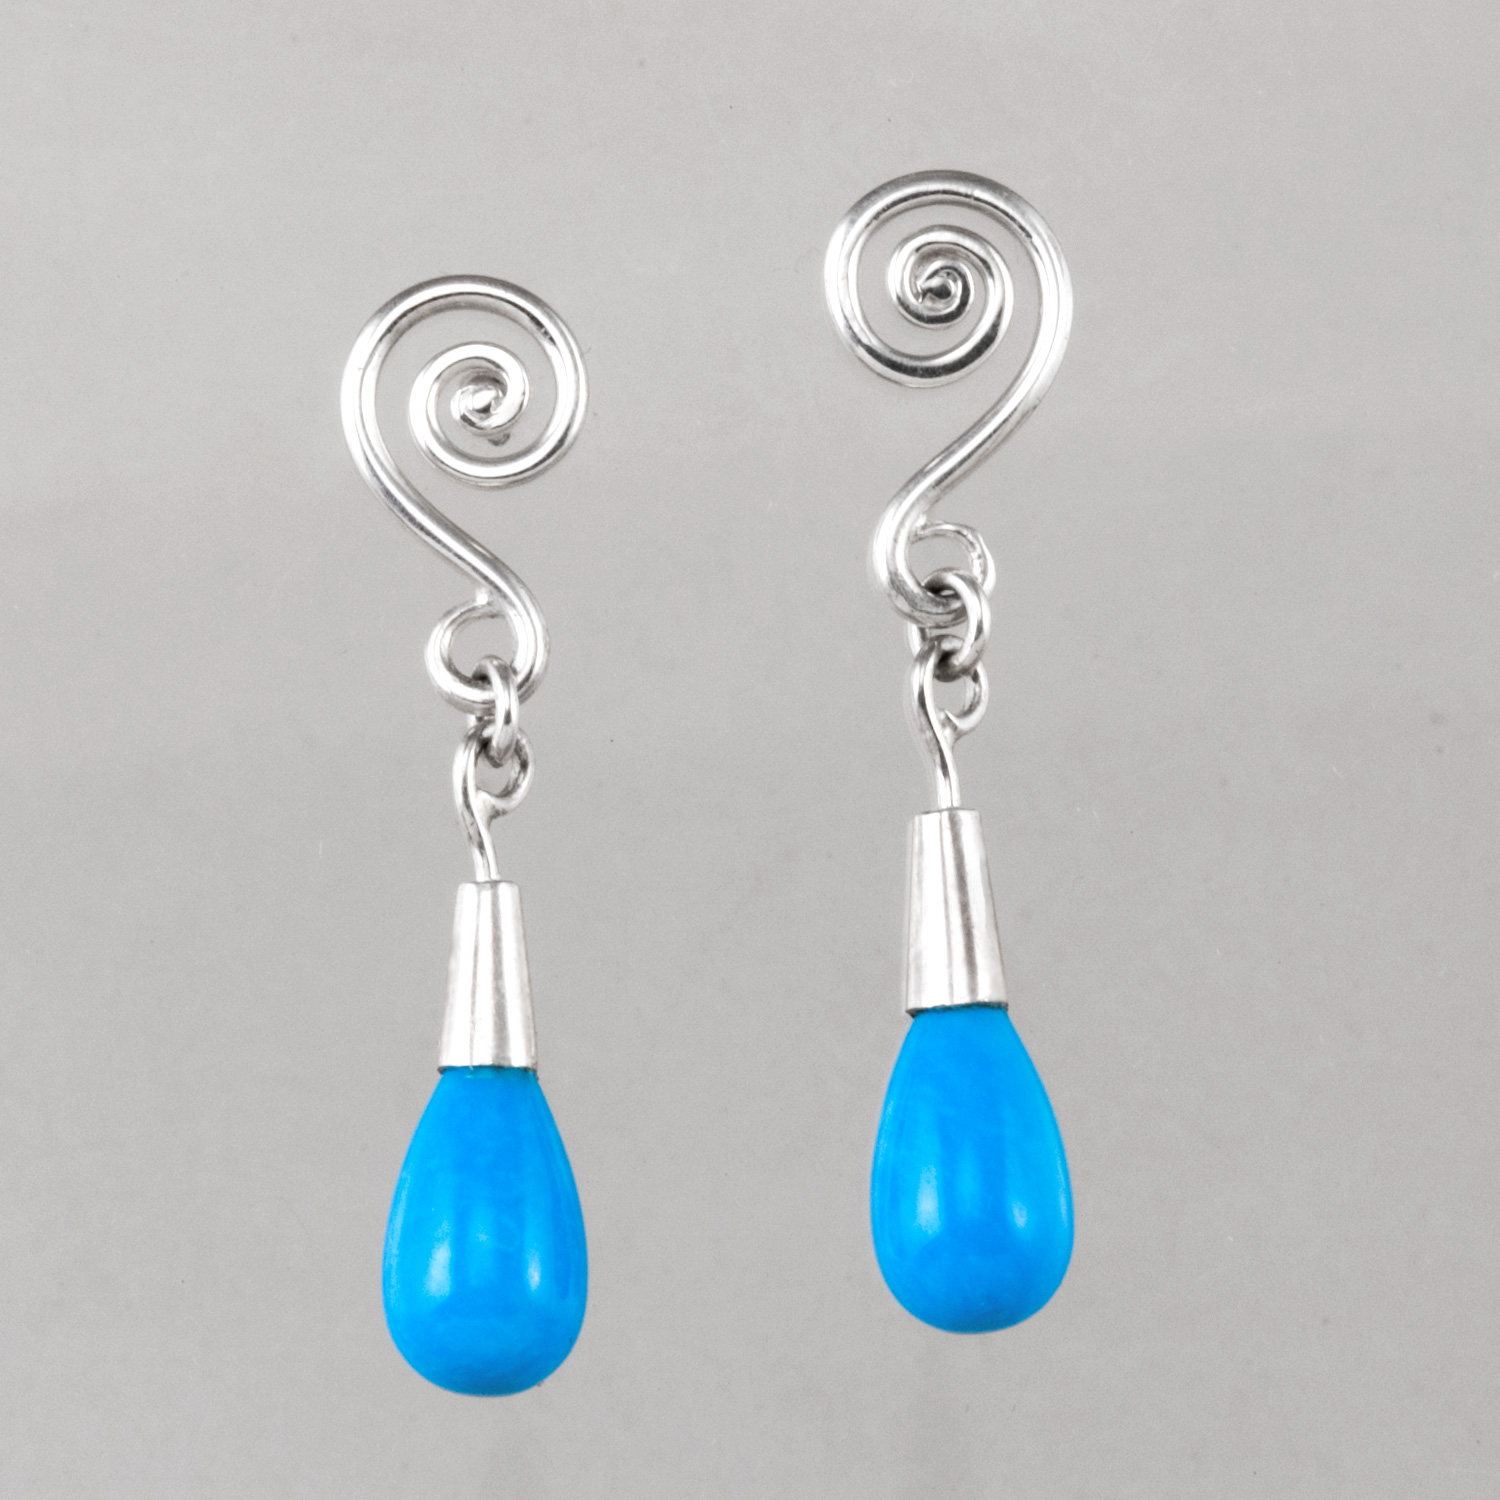 Fiddlehead Drop Earrings in sterling silver with Sleeping Beauty turquoise by Tamberlaine